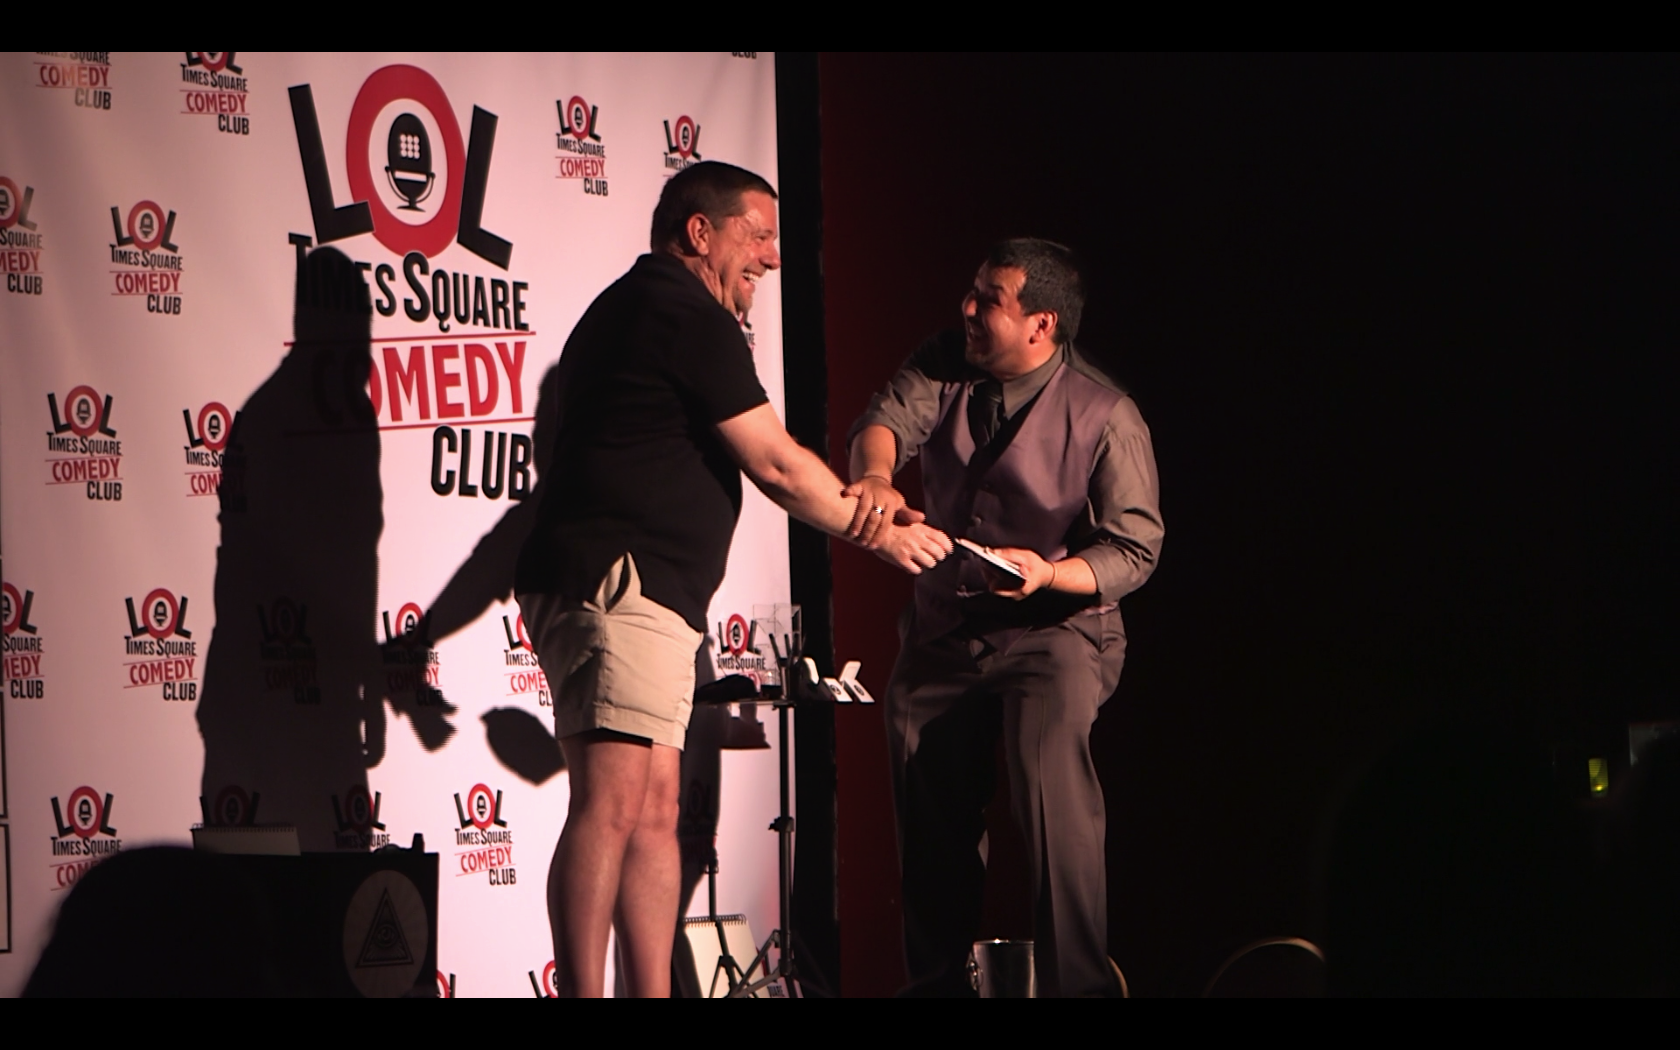 Lol Comedy Club Stage with Omar olusion performing a comedic card effect